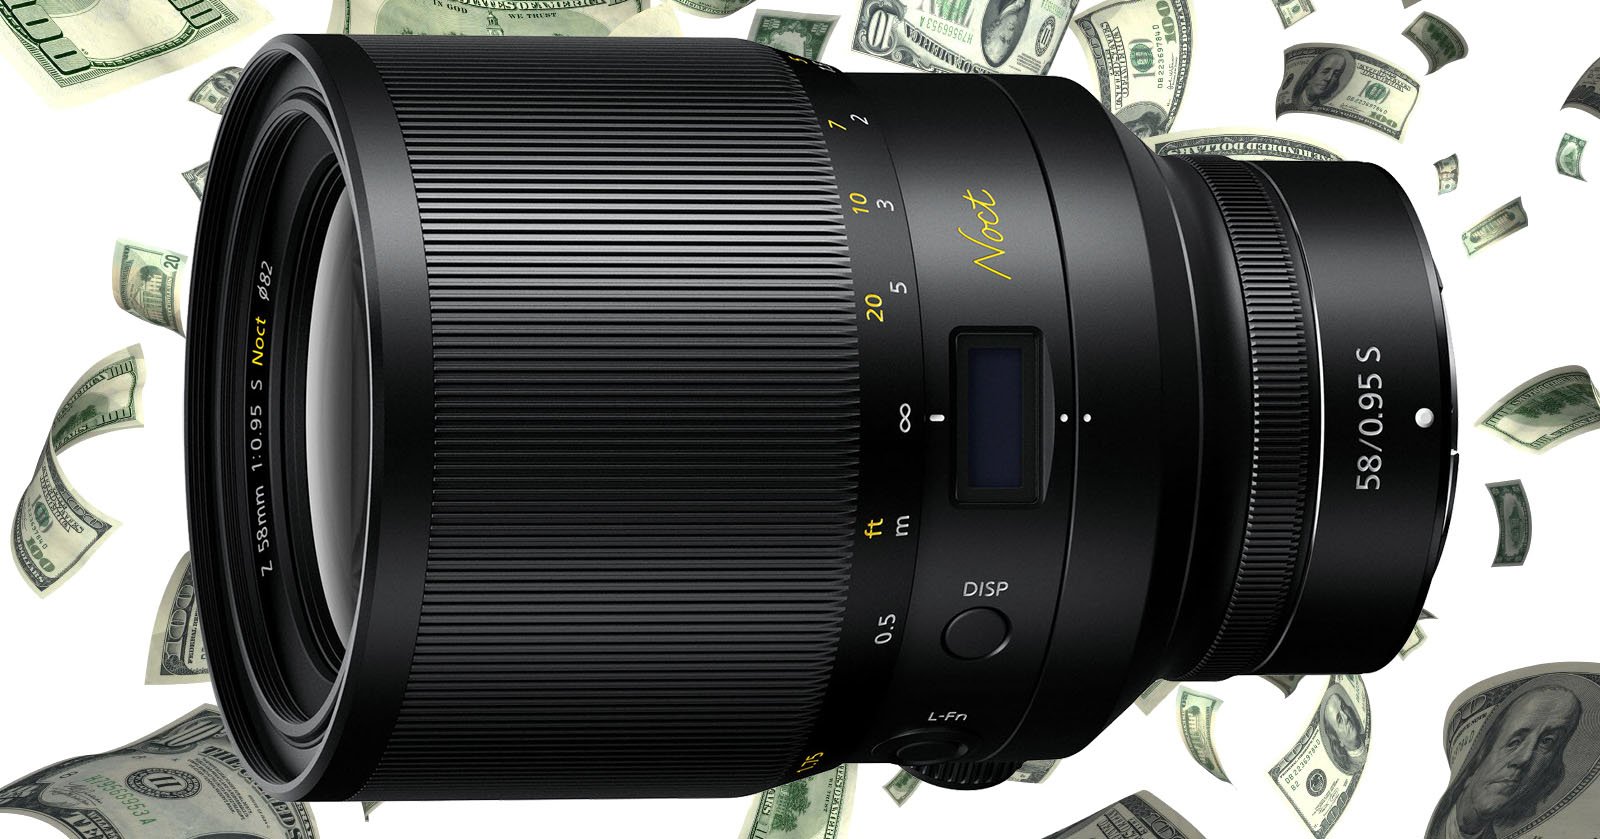 Nikons 58mm f/0.95 Noct Lens is Going to Cost $8,000: Report